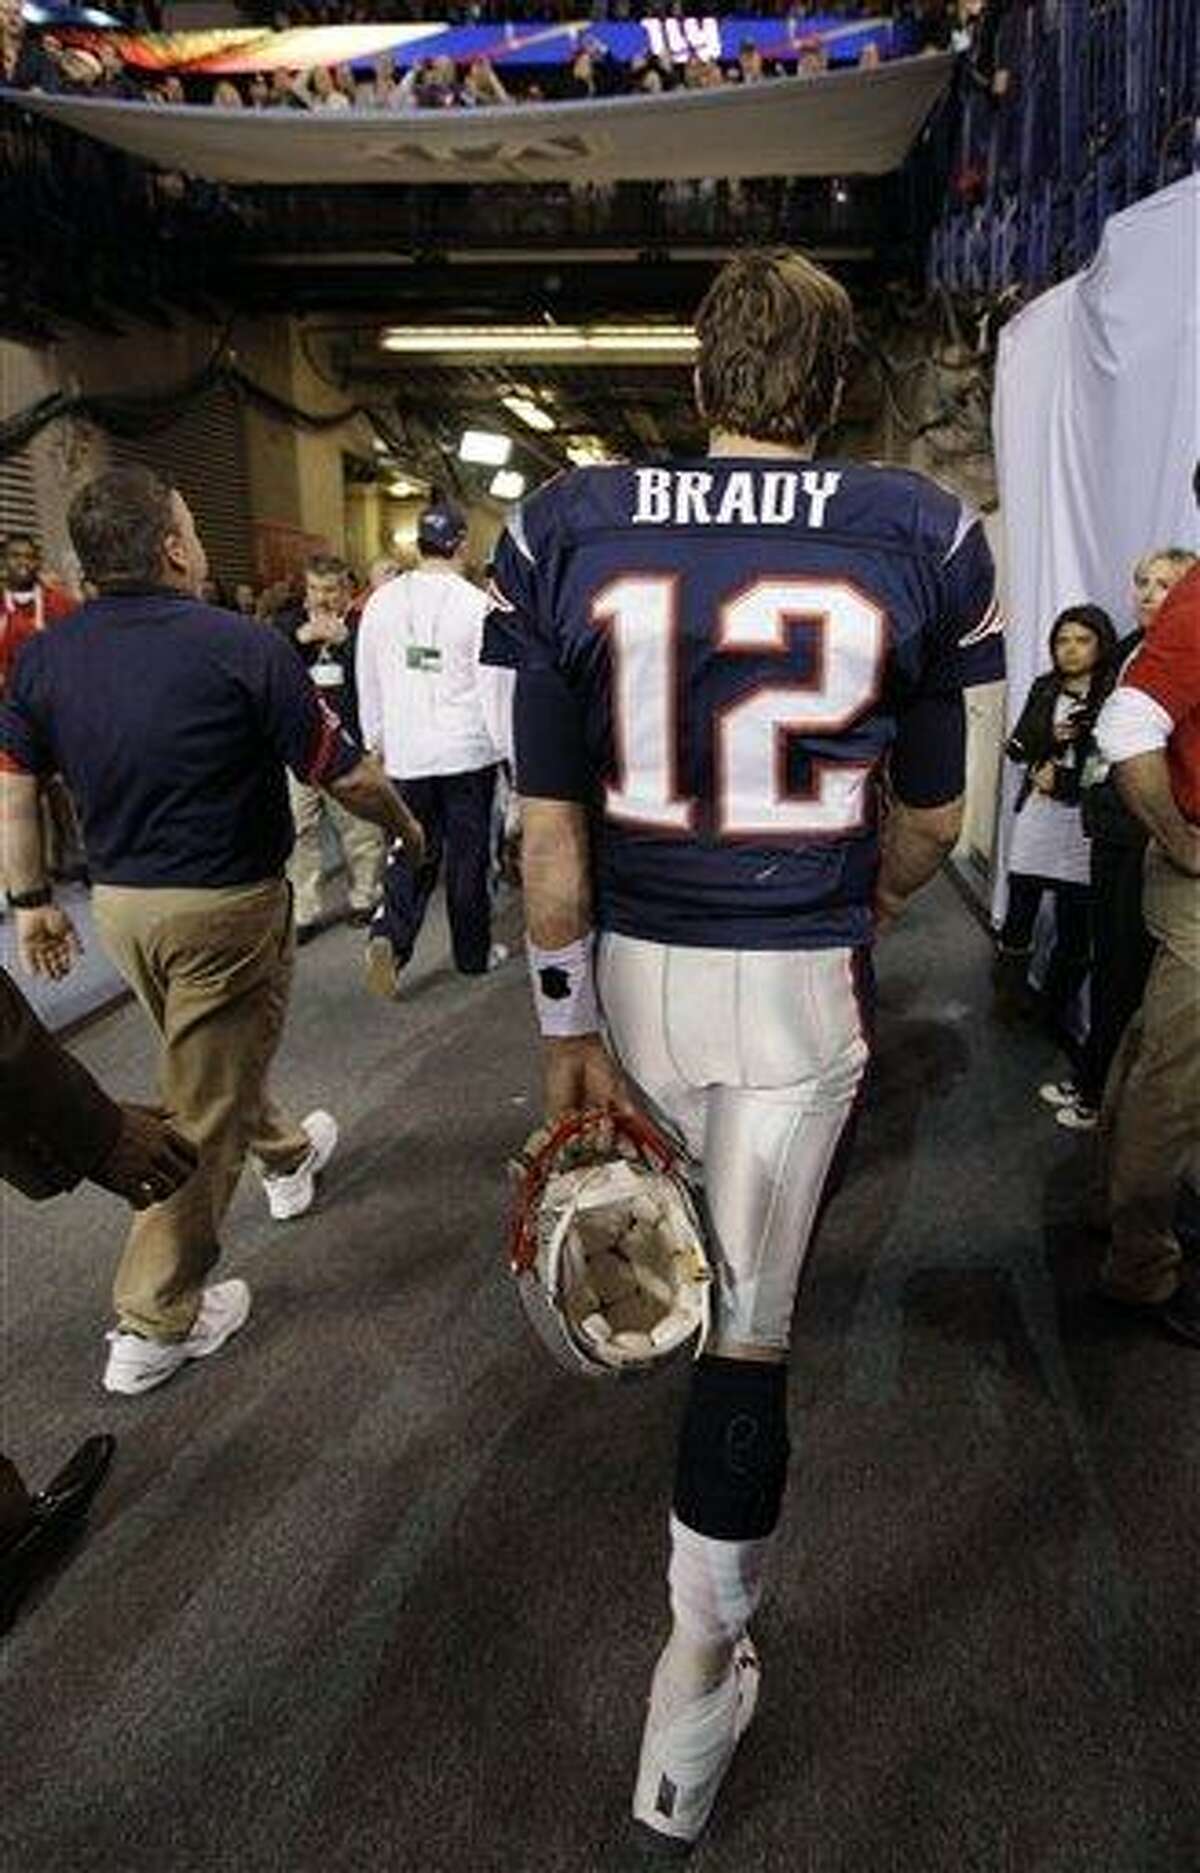 New England Patriots quarterback Tom Brady walks off the field after the Patriots lost to the New York Giants 21-17 in the NFL Super Bowl XLVI football game, Sunday, Feb. 5, 2012, in Indianapolis. (AP Photo/Paul Sancya)